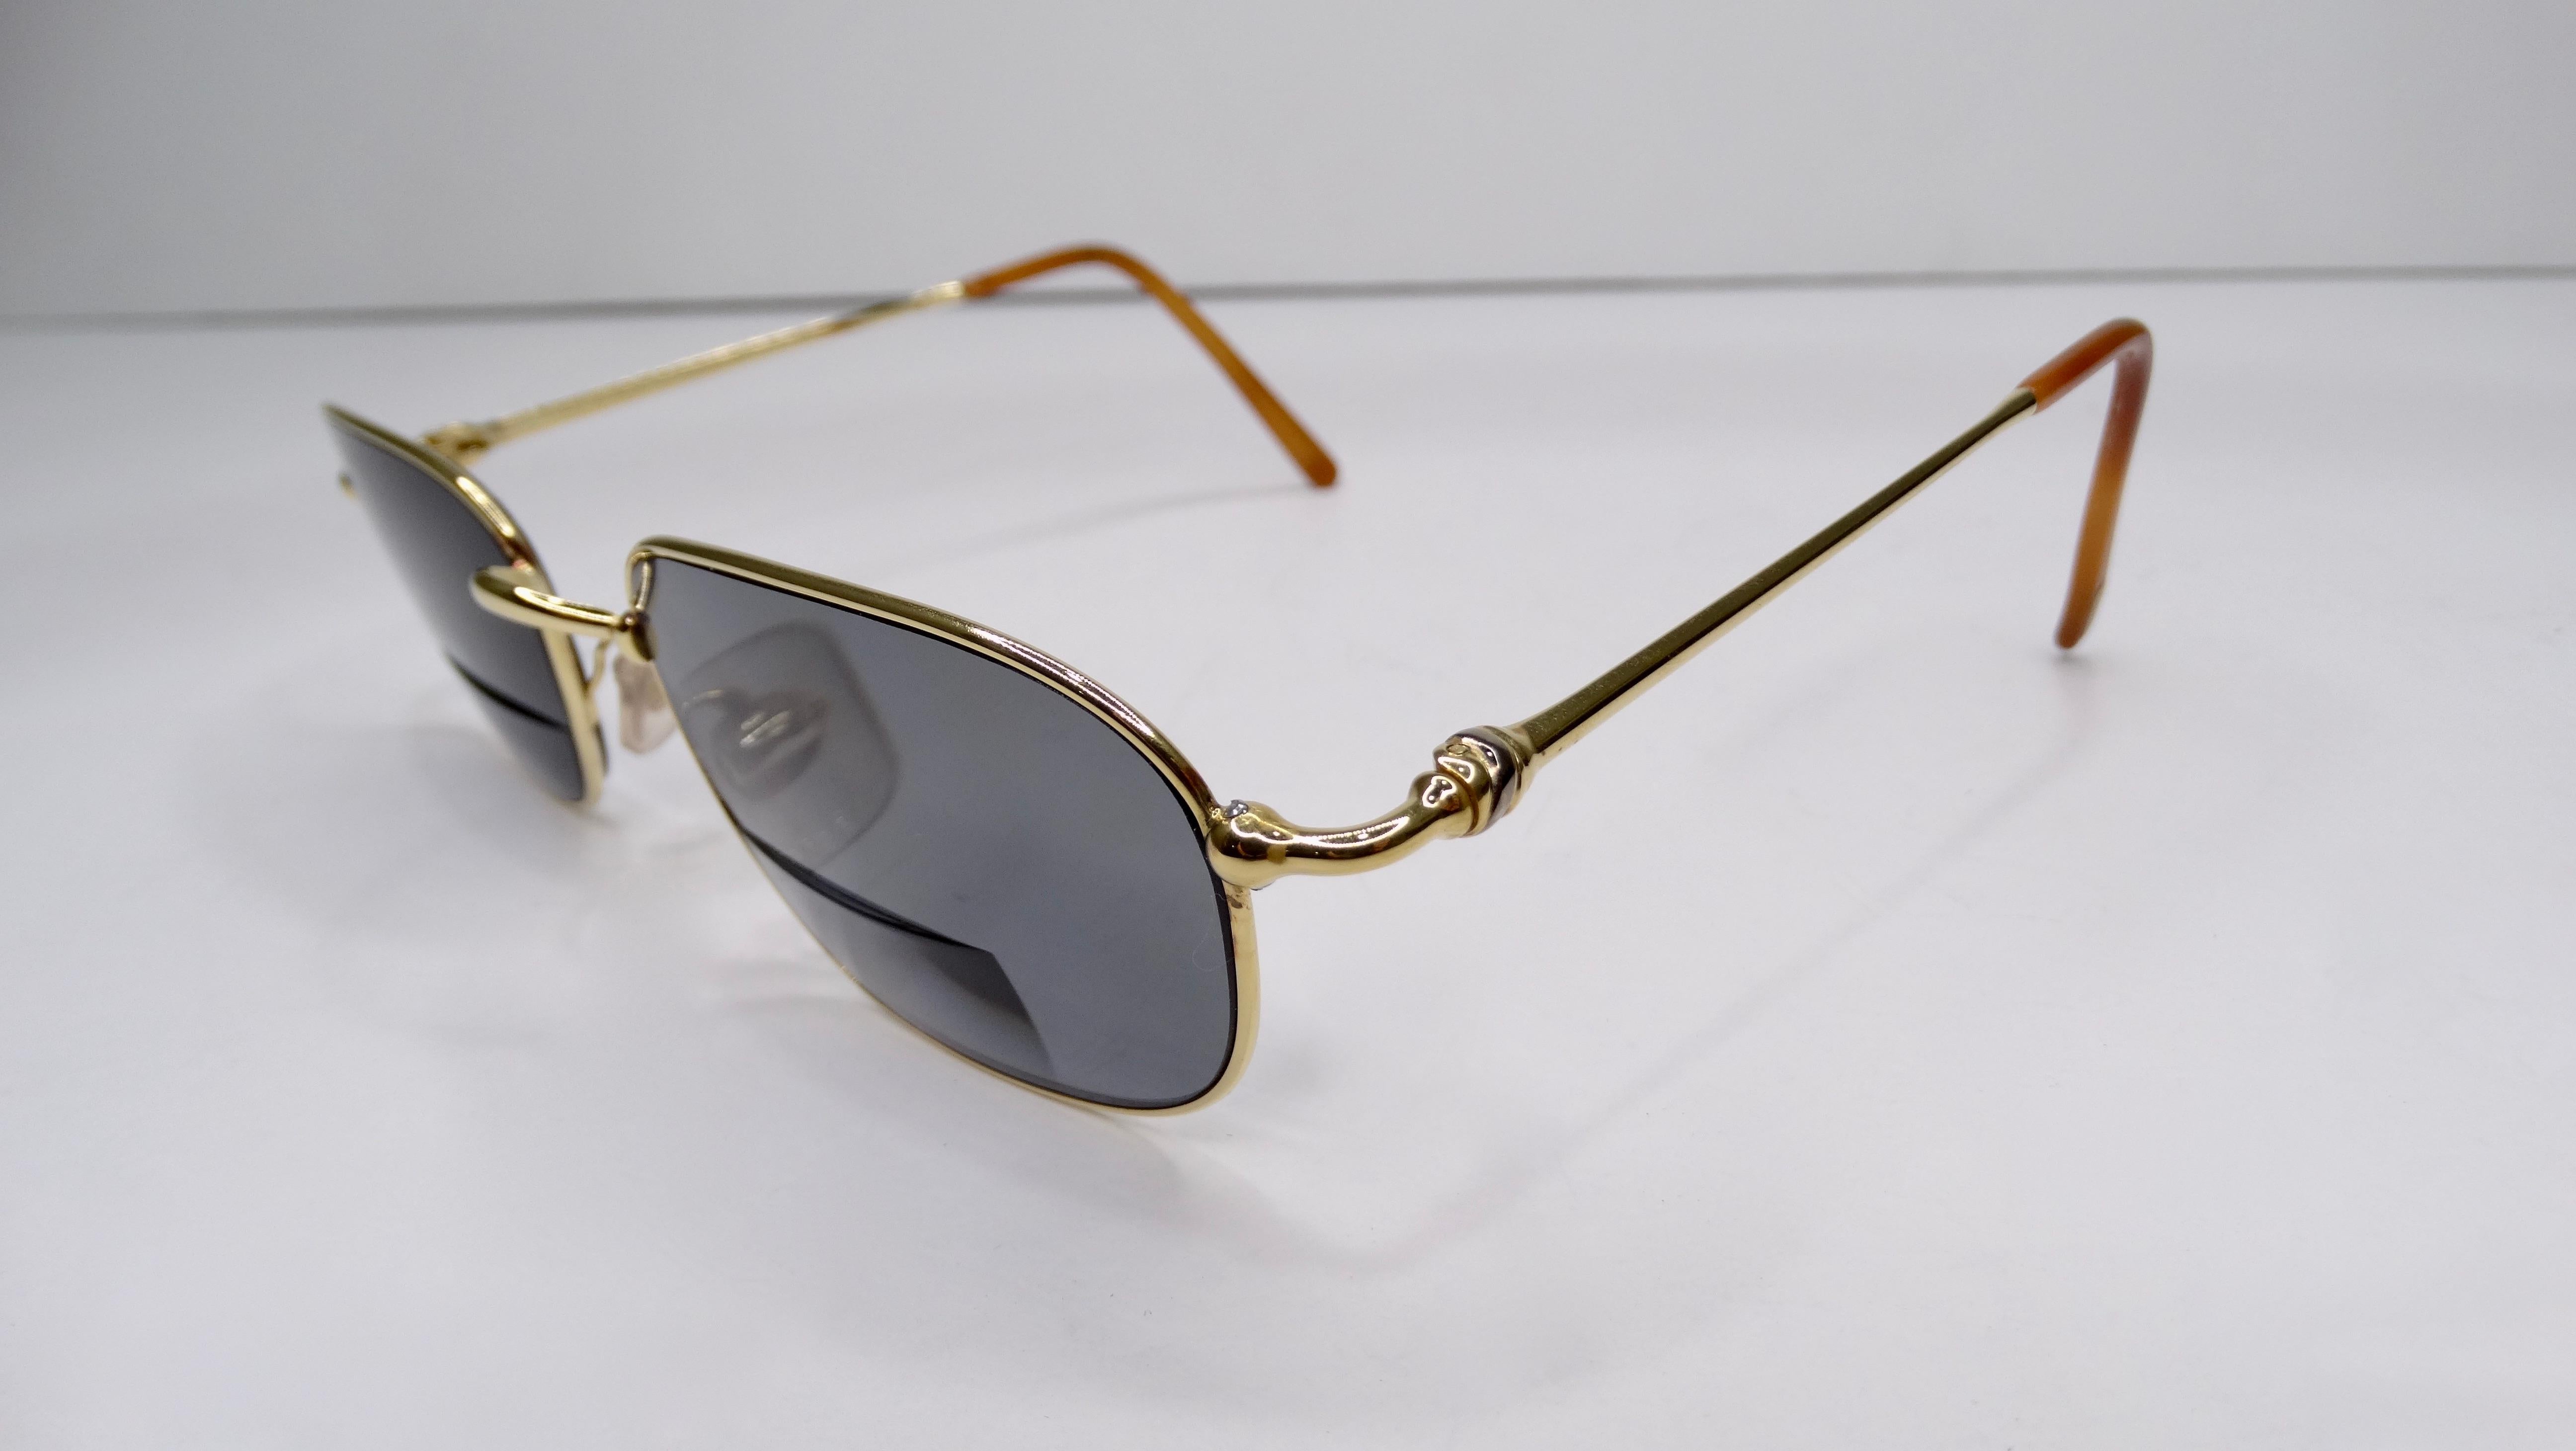 A favorite of both jewelry and fashion lovers, Cartier is always a classic! Circa 1980s, these sunglasses feature a two-tone silver and 18k gold plated frame with a knotted design on the arms. The lenses in these sunglasses are prescription/bifocal